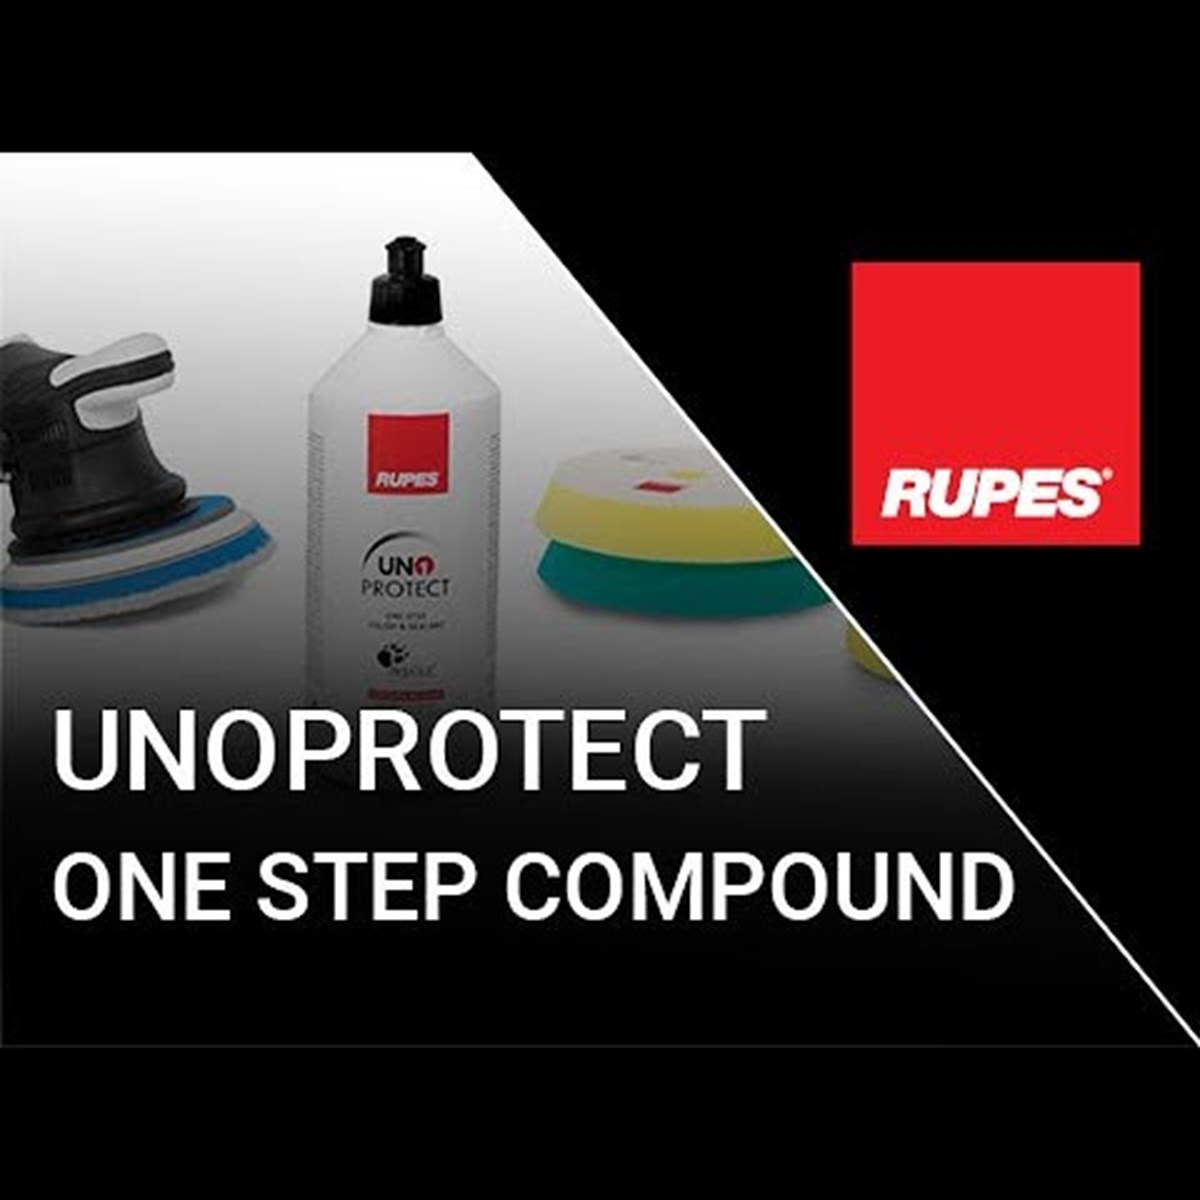 How to use Rupes Uno Protect